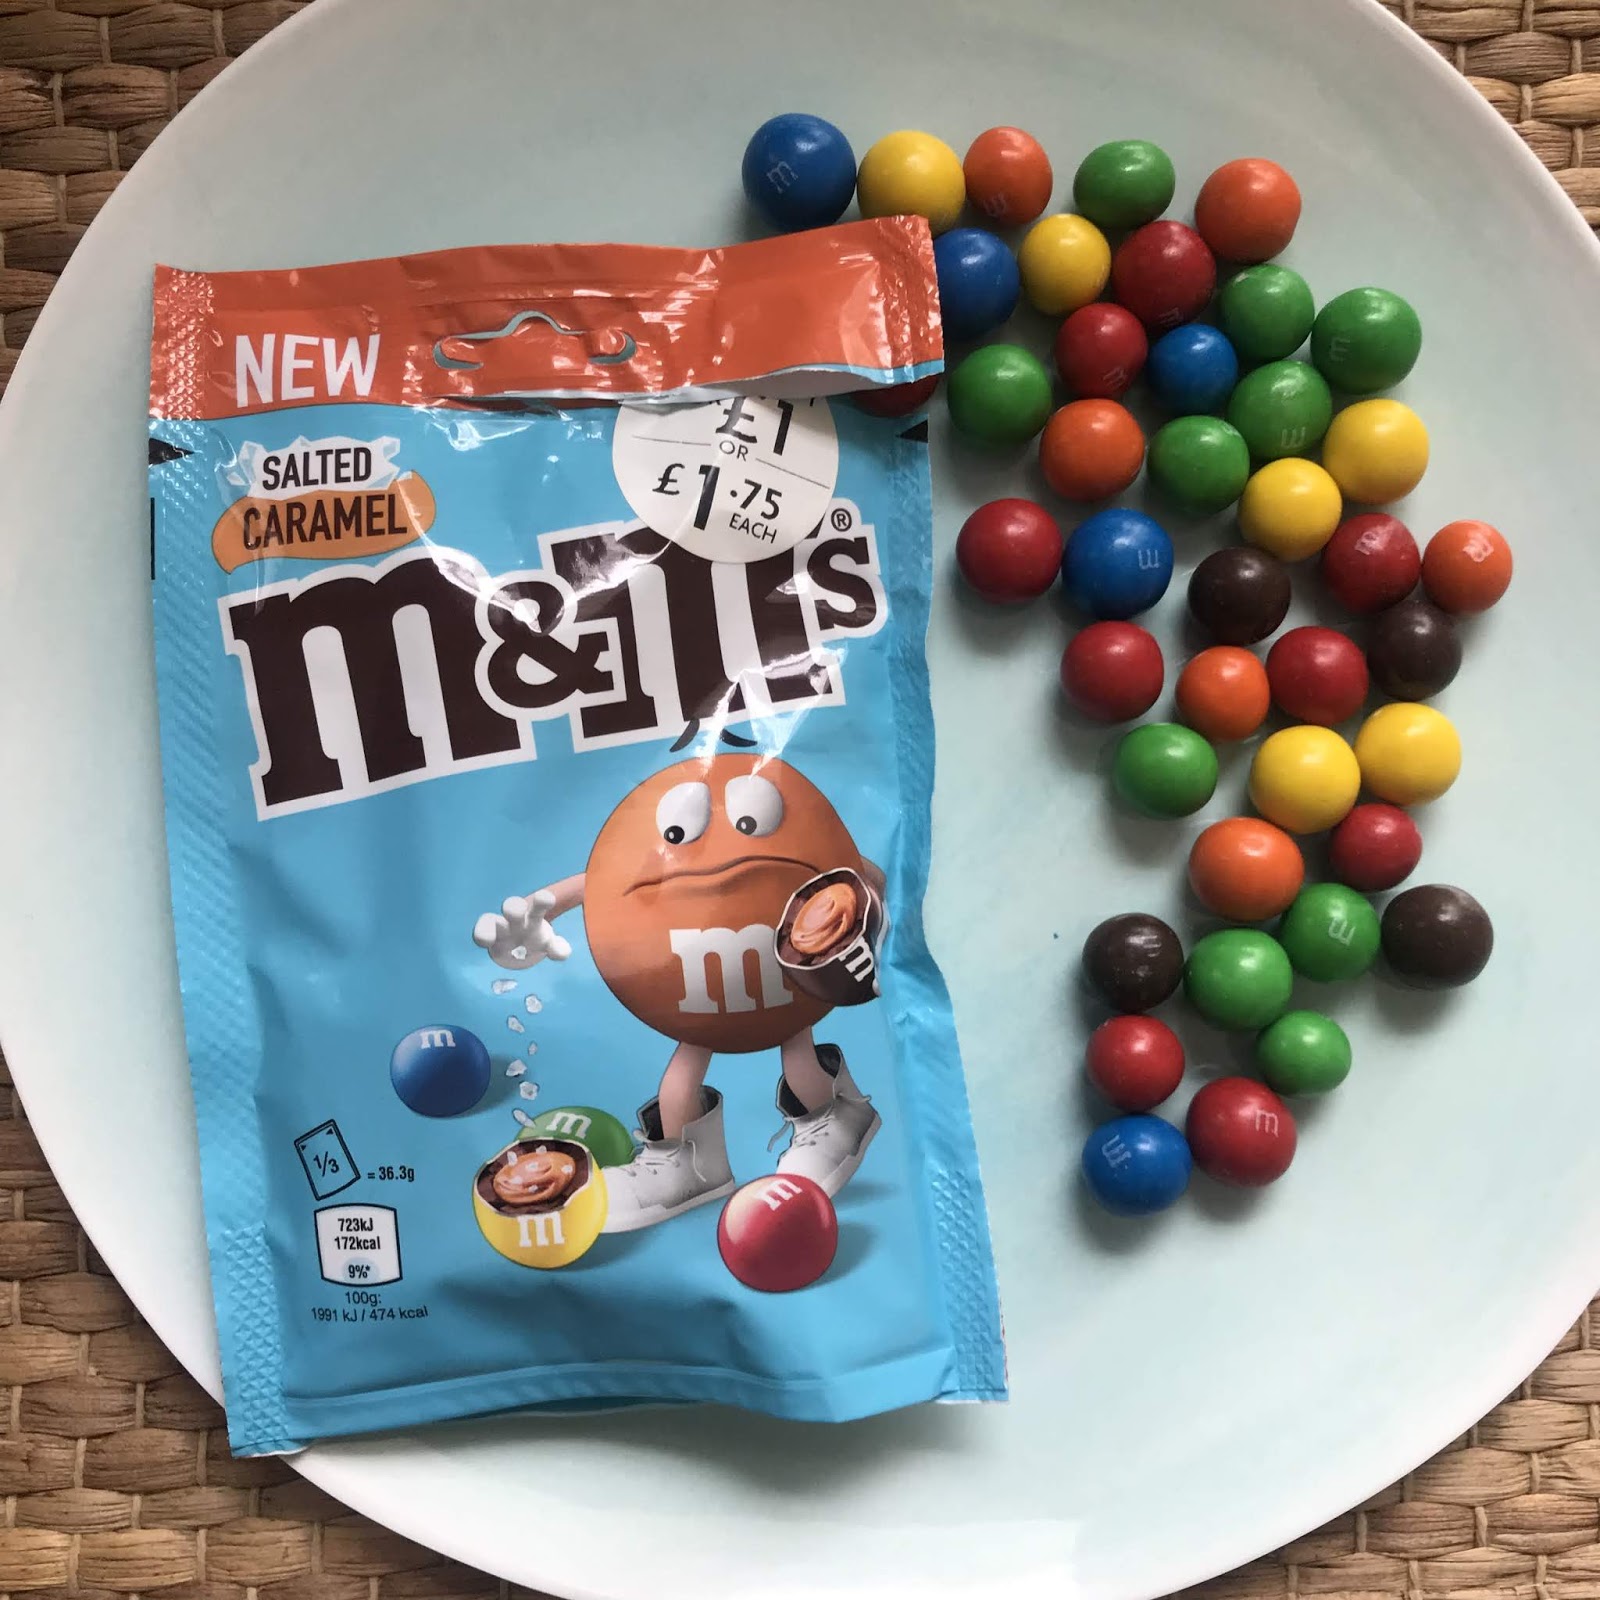 Review: Caramel M&M's